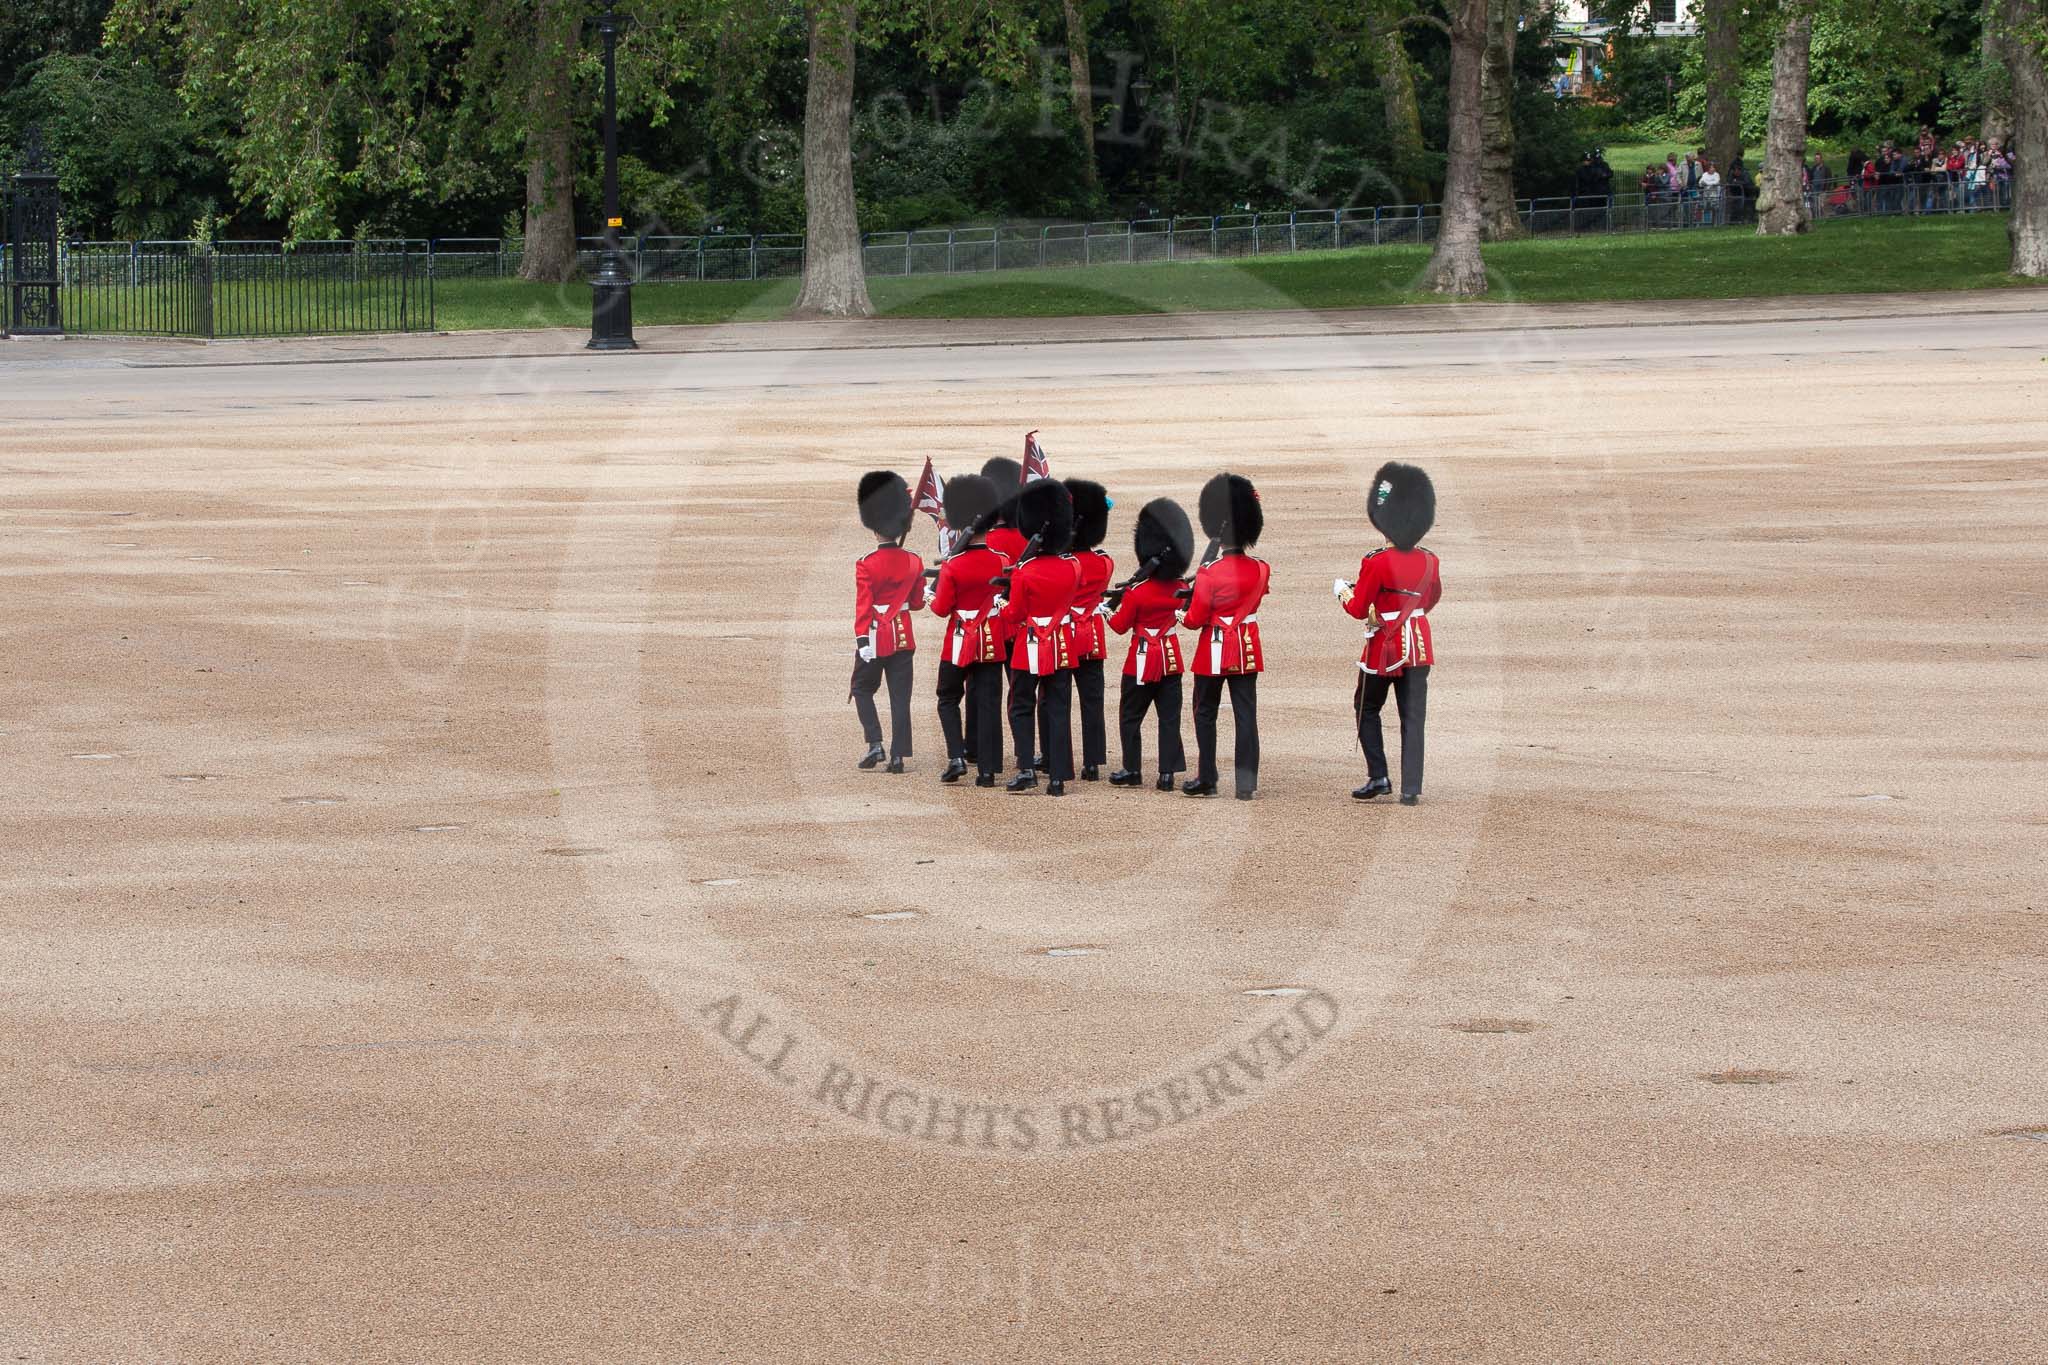 The Colonel's Review 2012: The "Keepers of the Ground" marching onto Horse Guards Parade to mark the positions for their sson to arrive guard on the parade ground..
Horse Guards Parade, Westminster,
London SW1,

United Kingdom,
on 09 June 2012 at 10:16, image #34